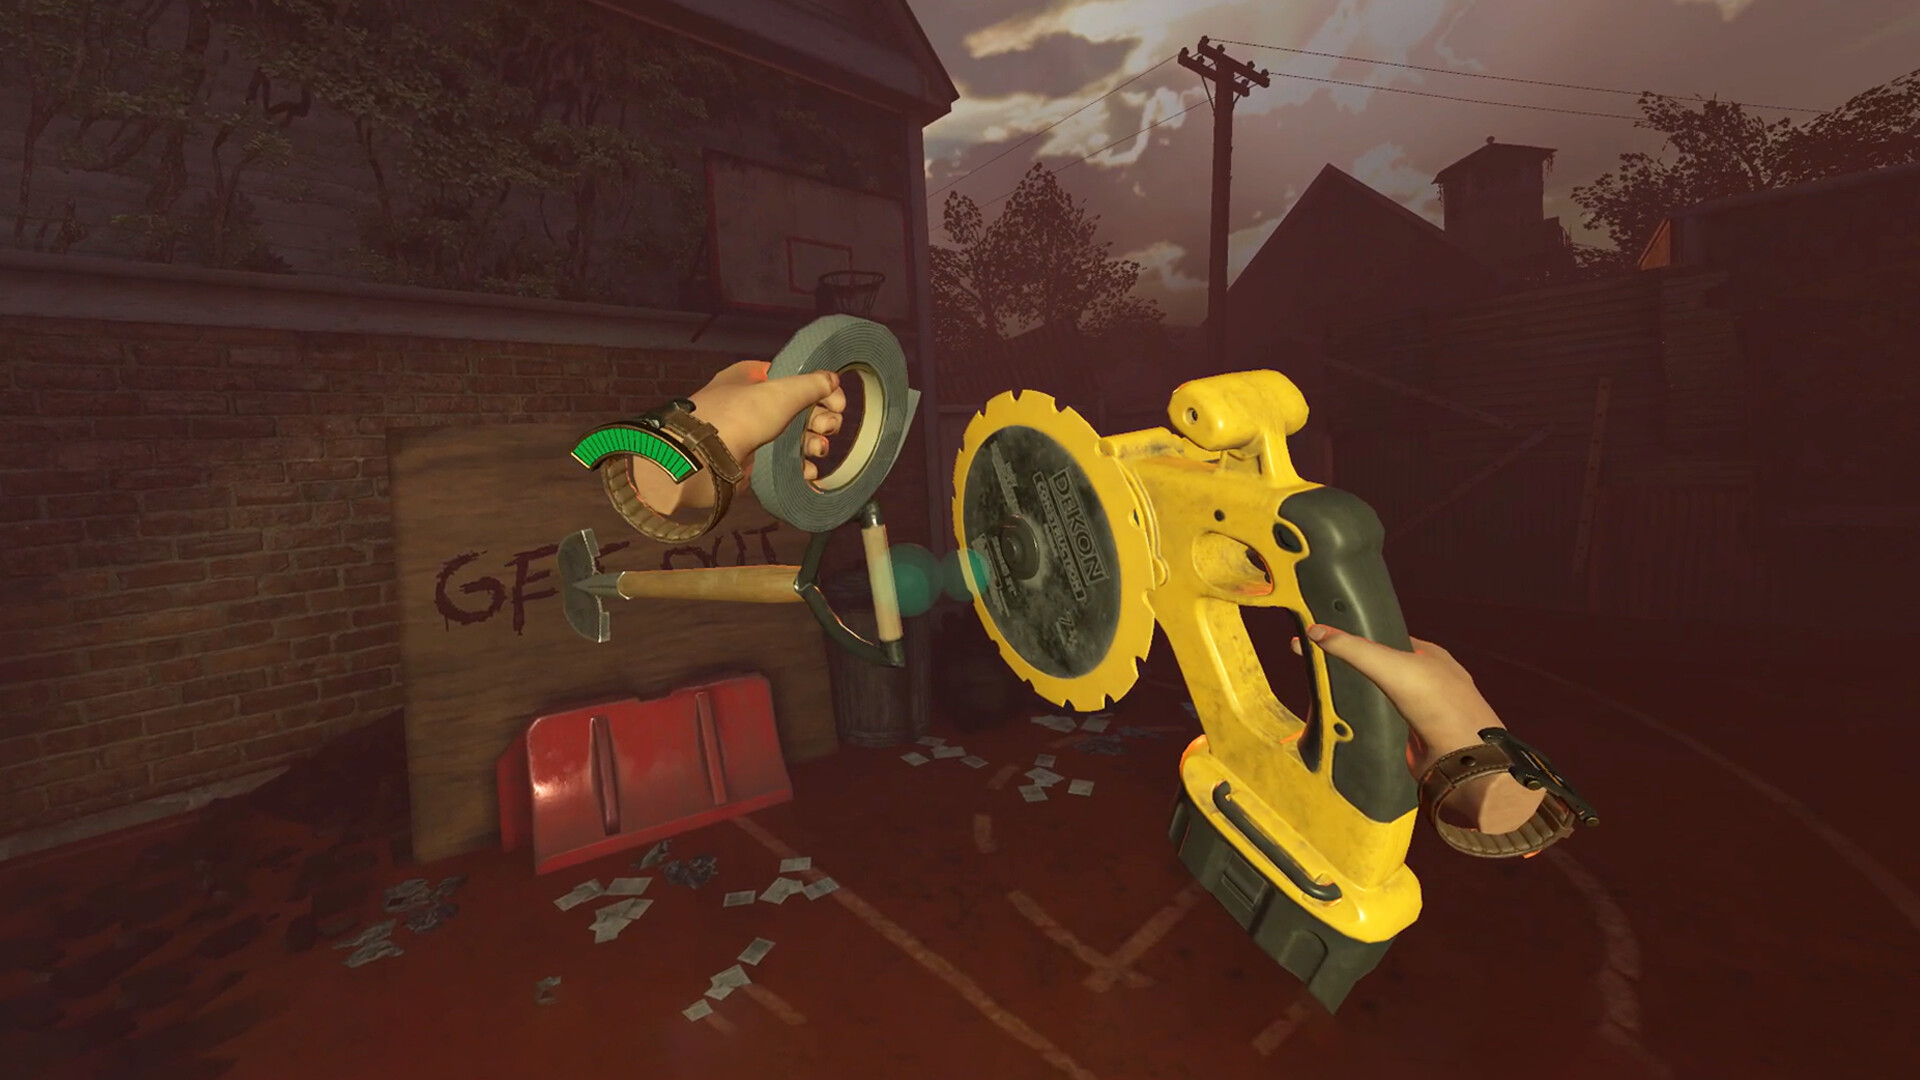 Requisition VR Is A Zombie Game With Killer Crafting - VRScout